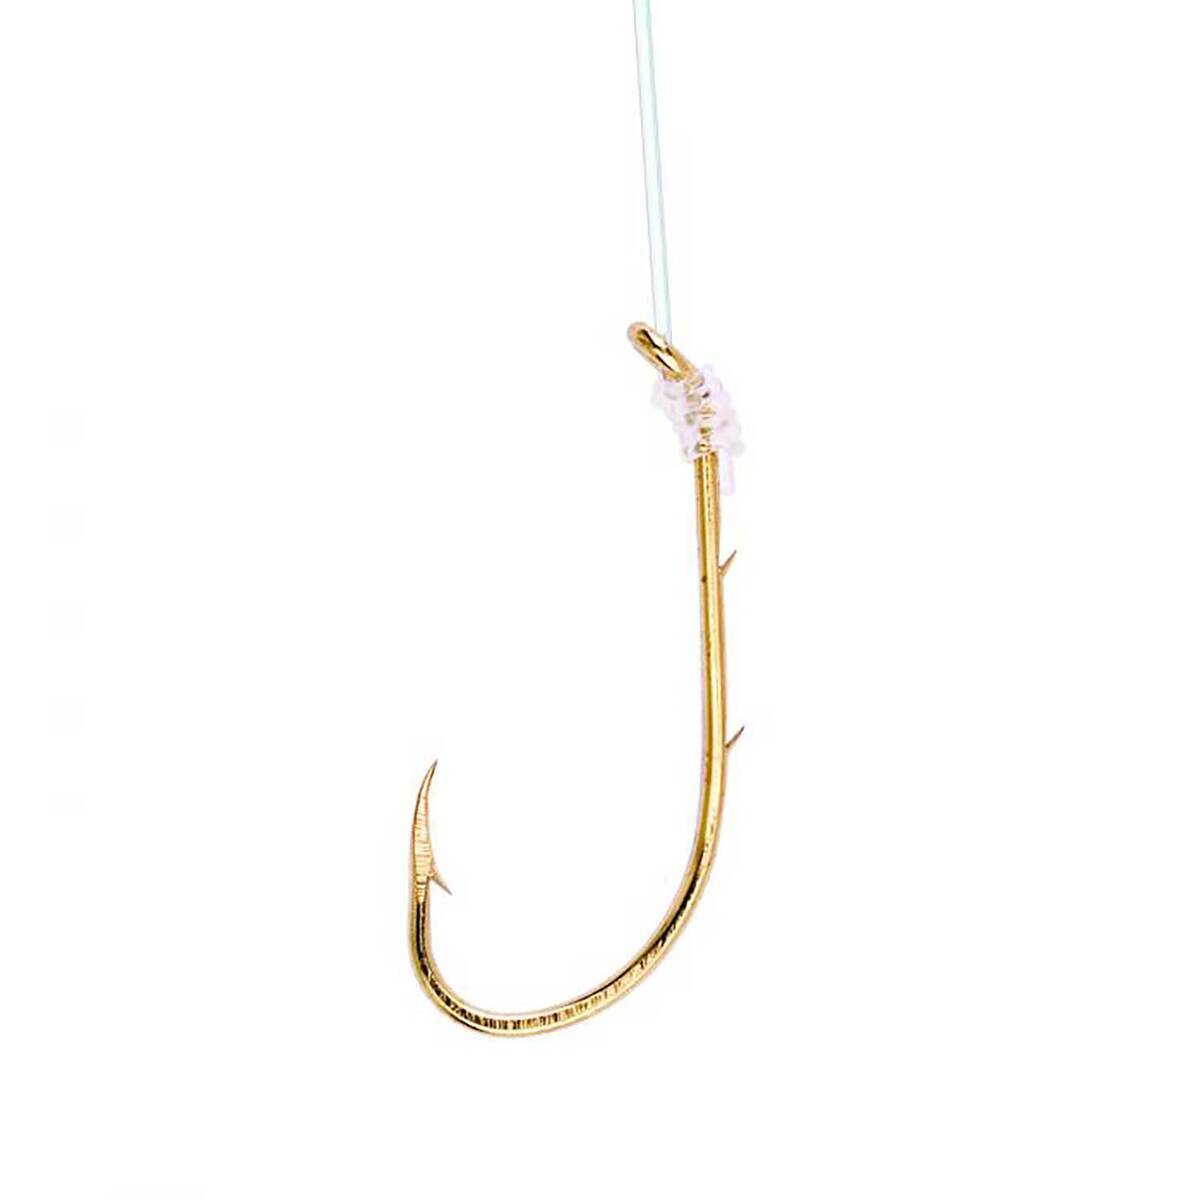 Eagle Claw - Baitholder Snell - Tackle Depot